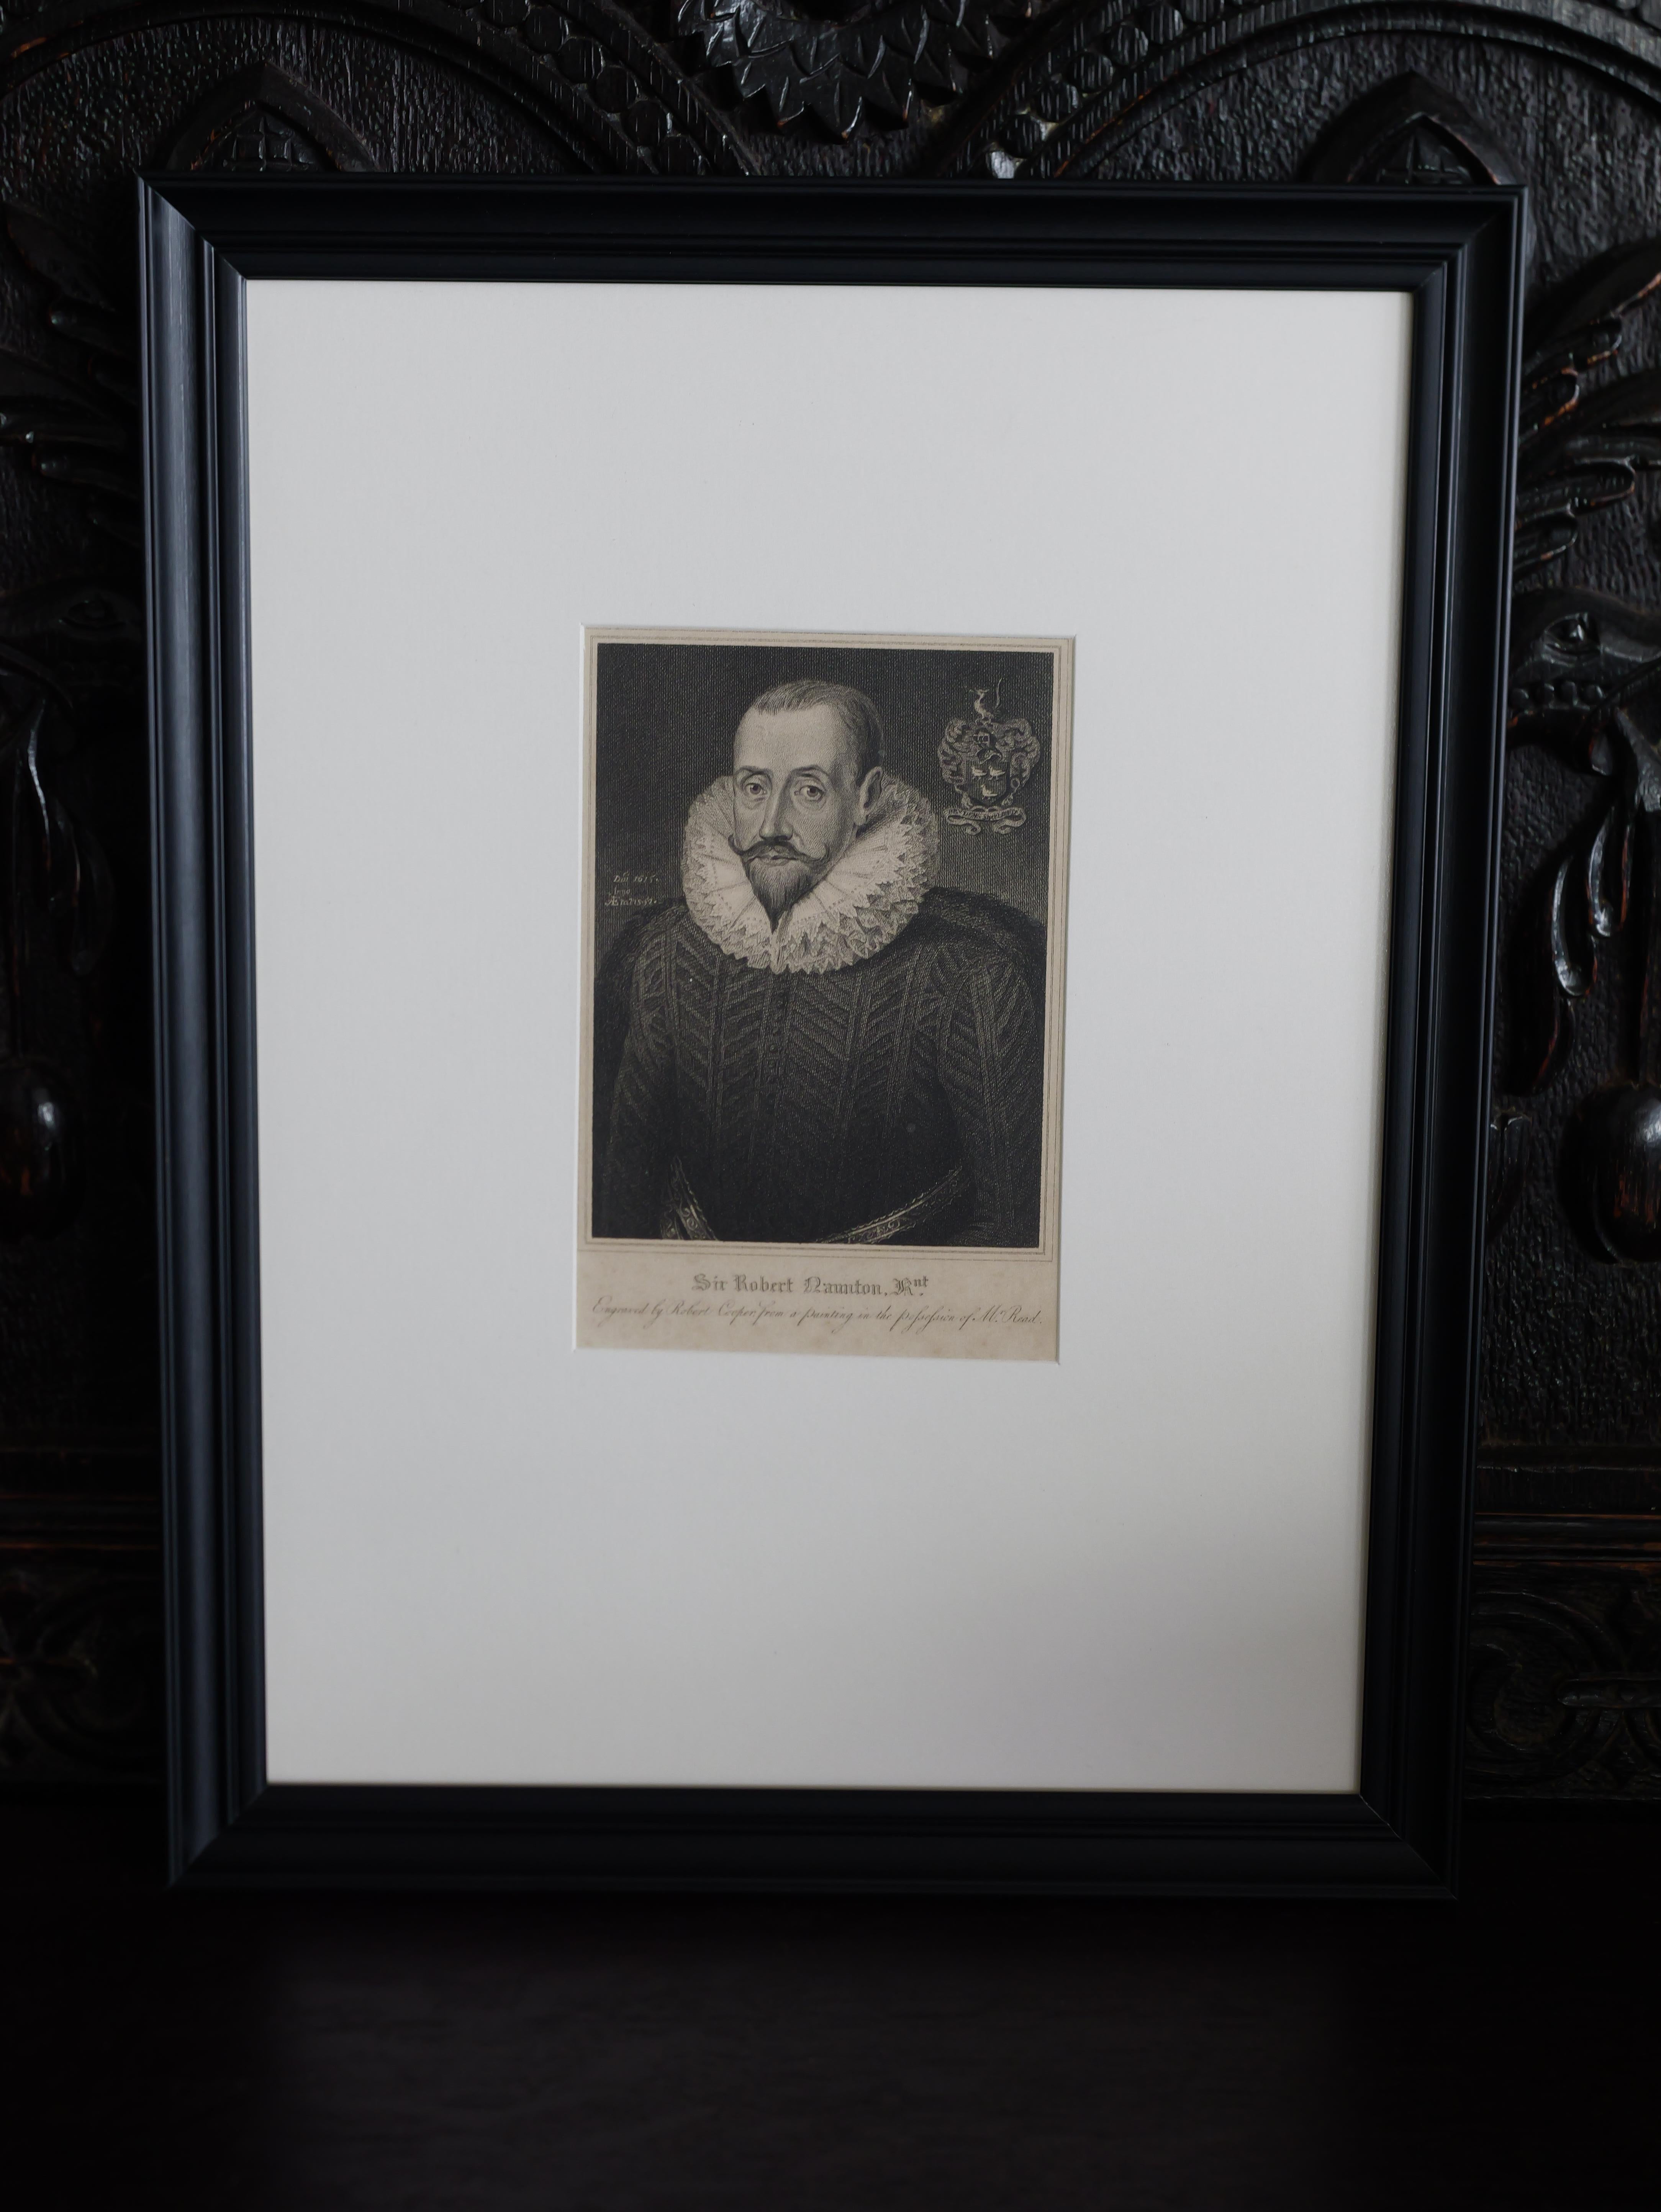 This antique engraving of Sir Robert Naunton, created by Robert Cooper from England, showcases the meticulous stipple engraving technique. Produced in 1814, this piece is in excellent condition and has already been professionally framed, ready to